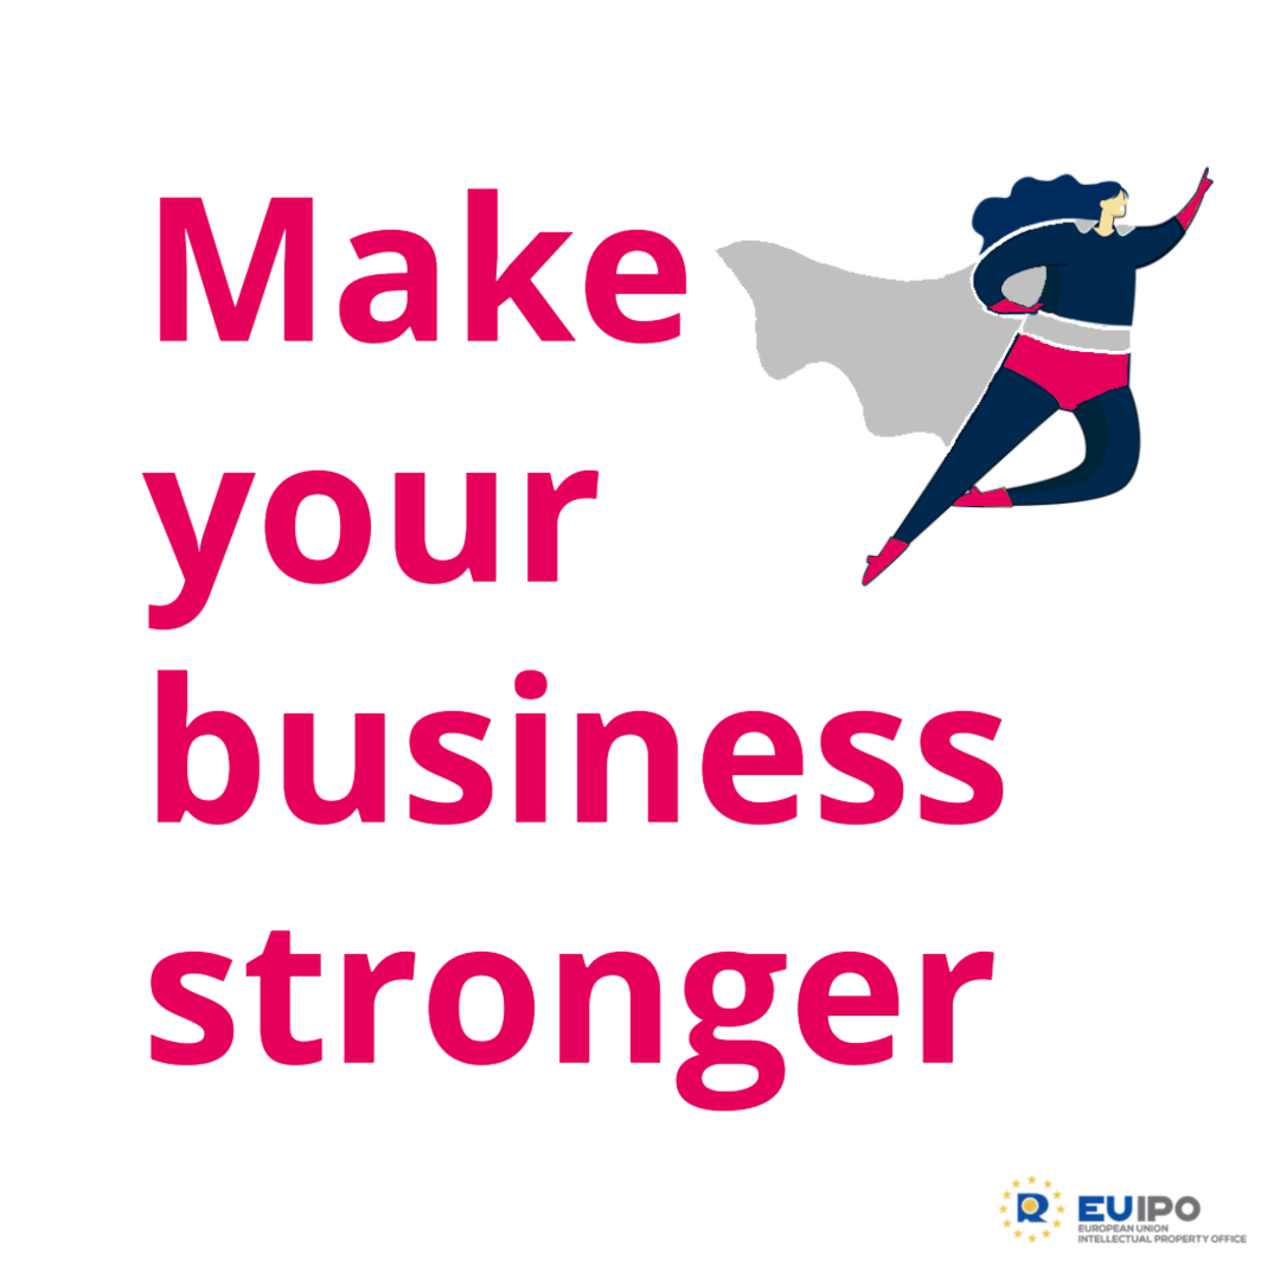 Make your business stronger